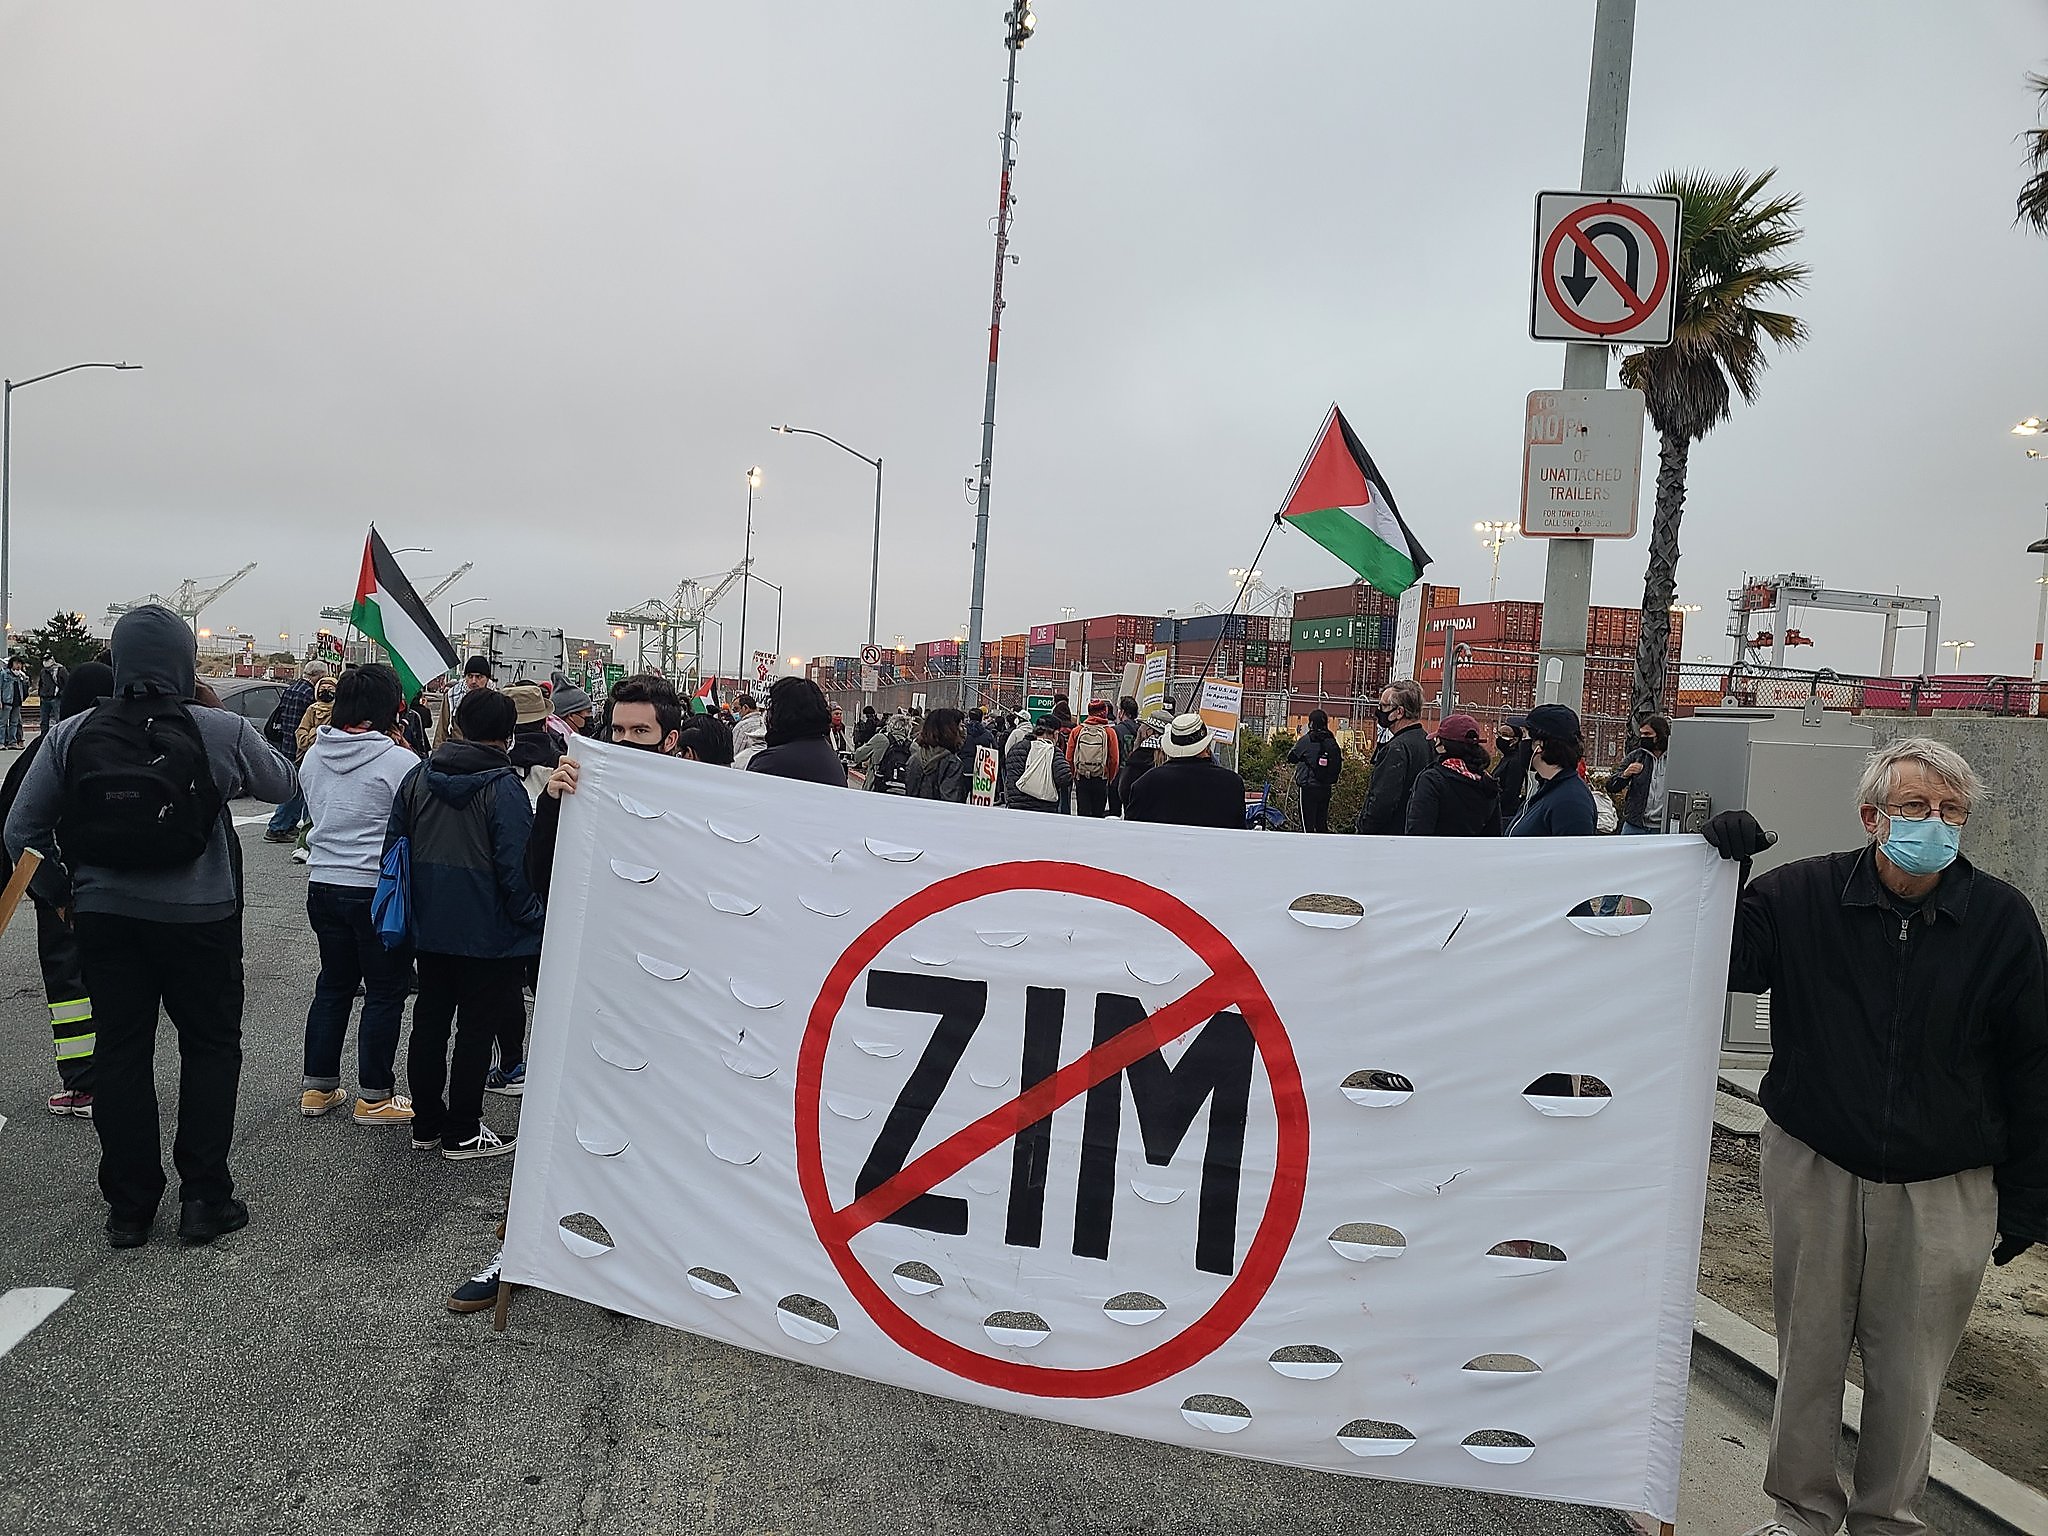 Pro-Palestinian protesters at Port of Oakland attempt to block unloading of Israeli cargo ship